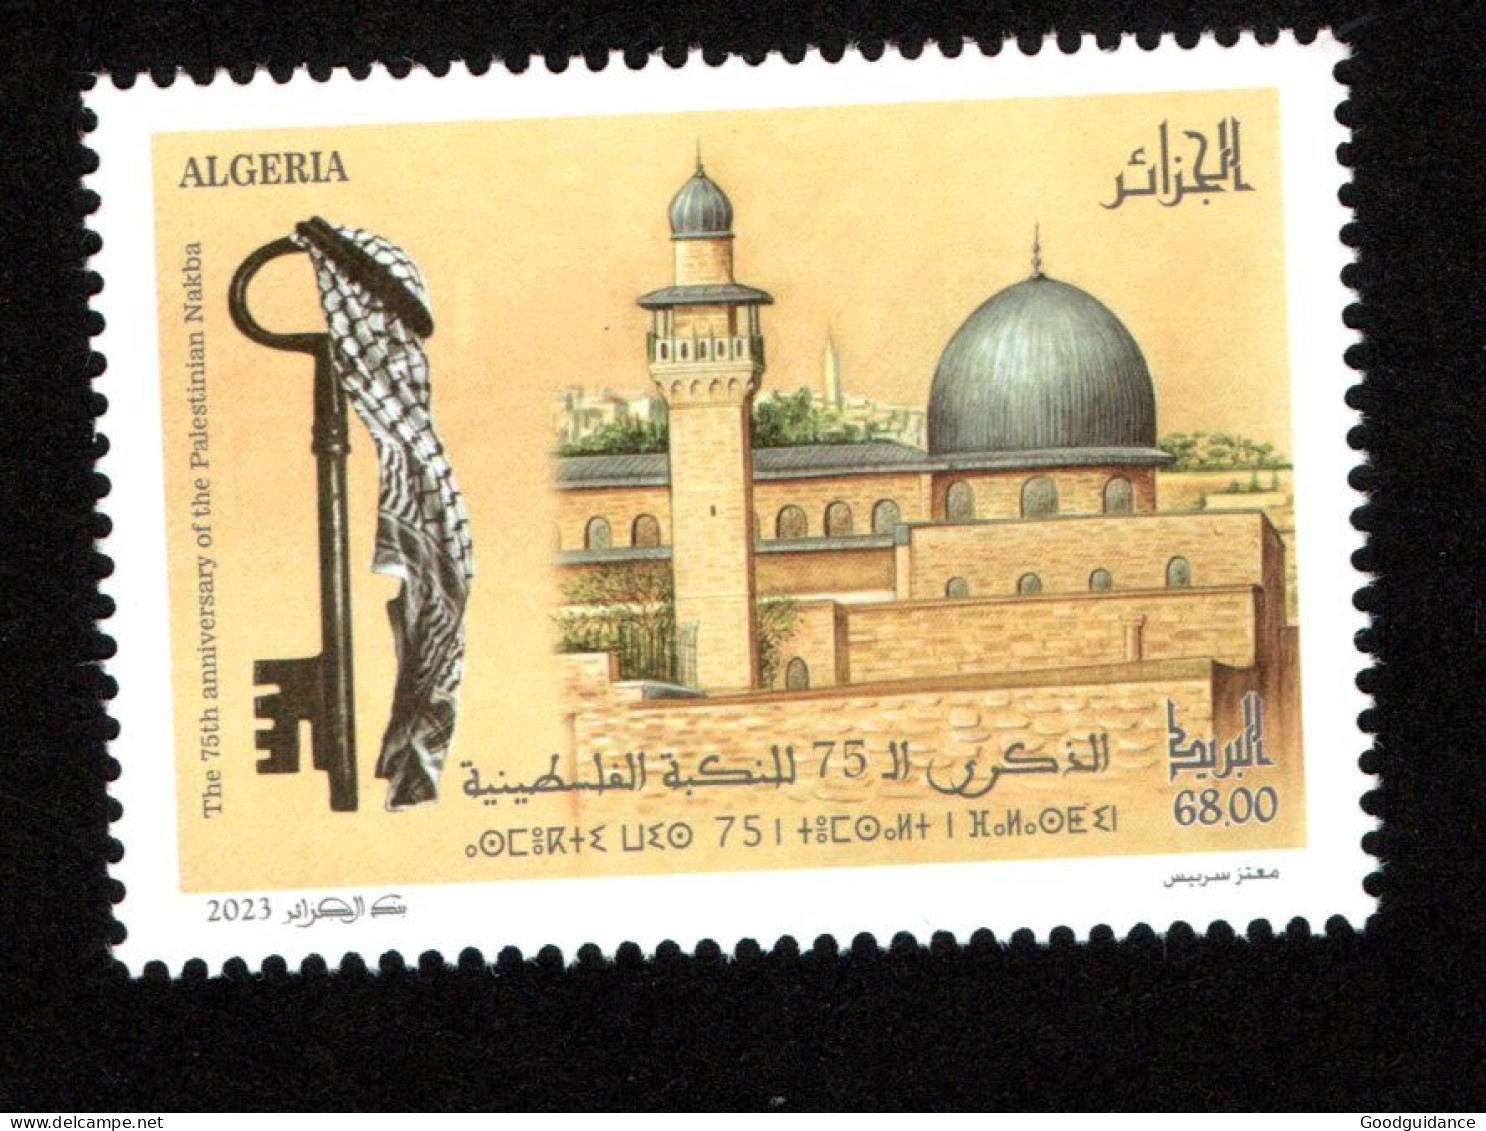 2023- Algeria- The 75th Anniversary Of The Palestinian Nakba- Jerusalem- Dom-MAP - Key - Complete Set 1v. MNH** - Mosques & Synagogues